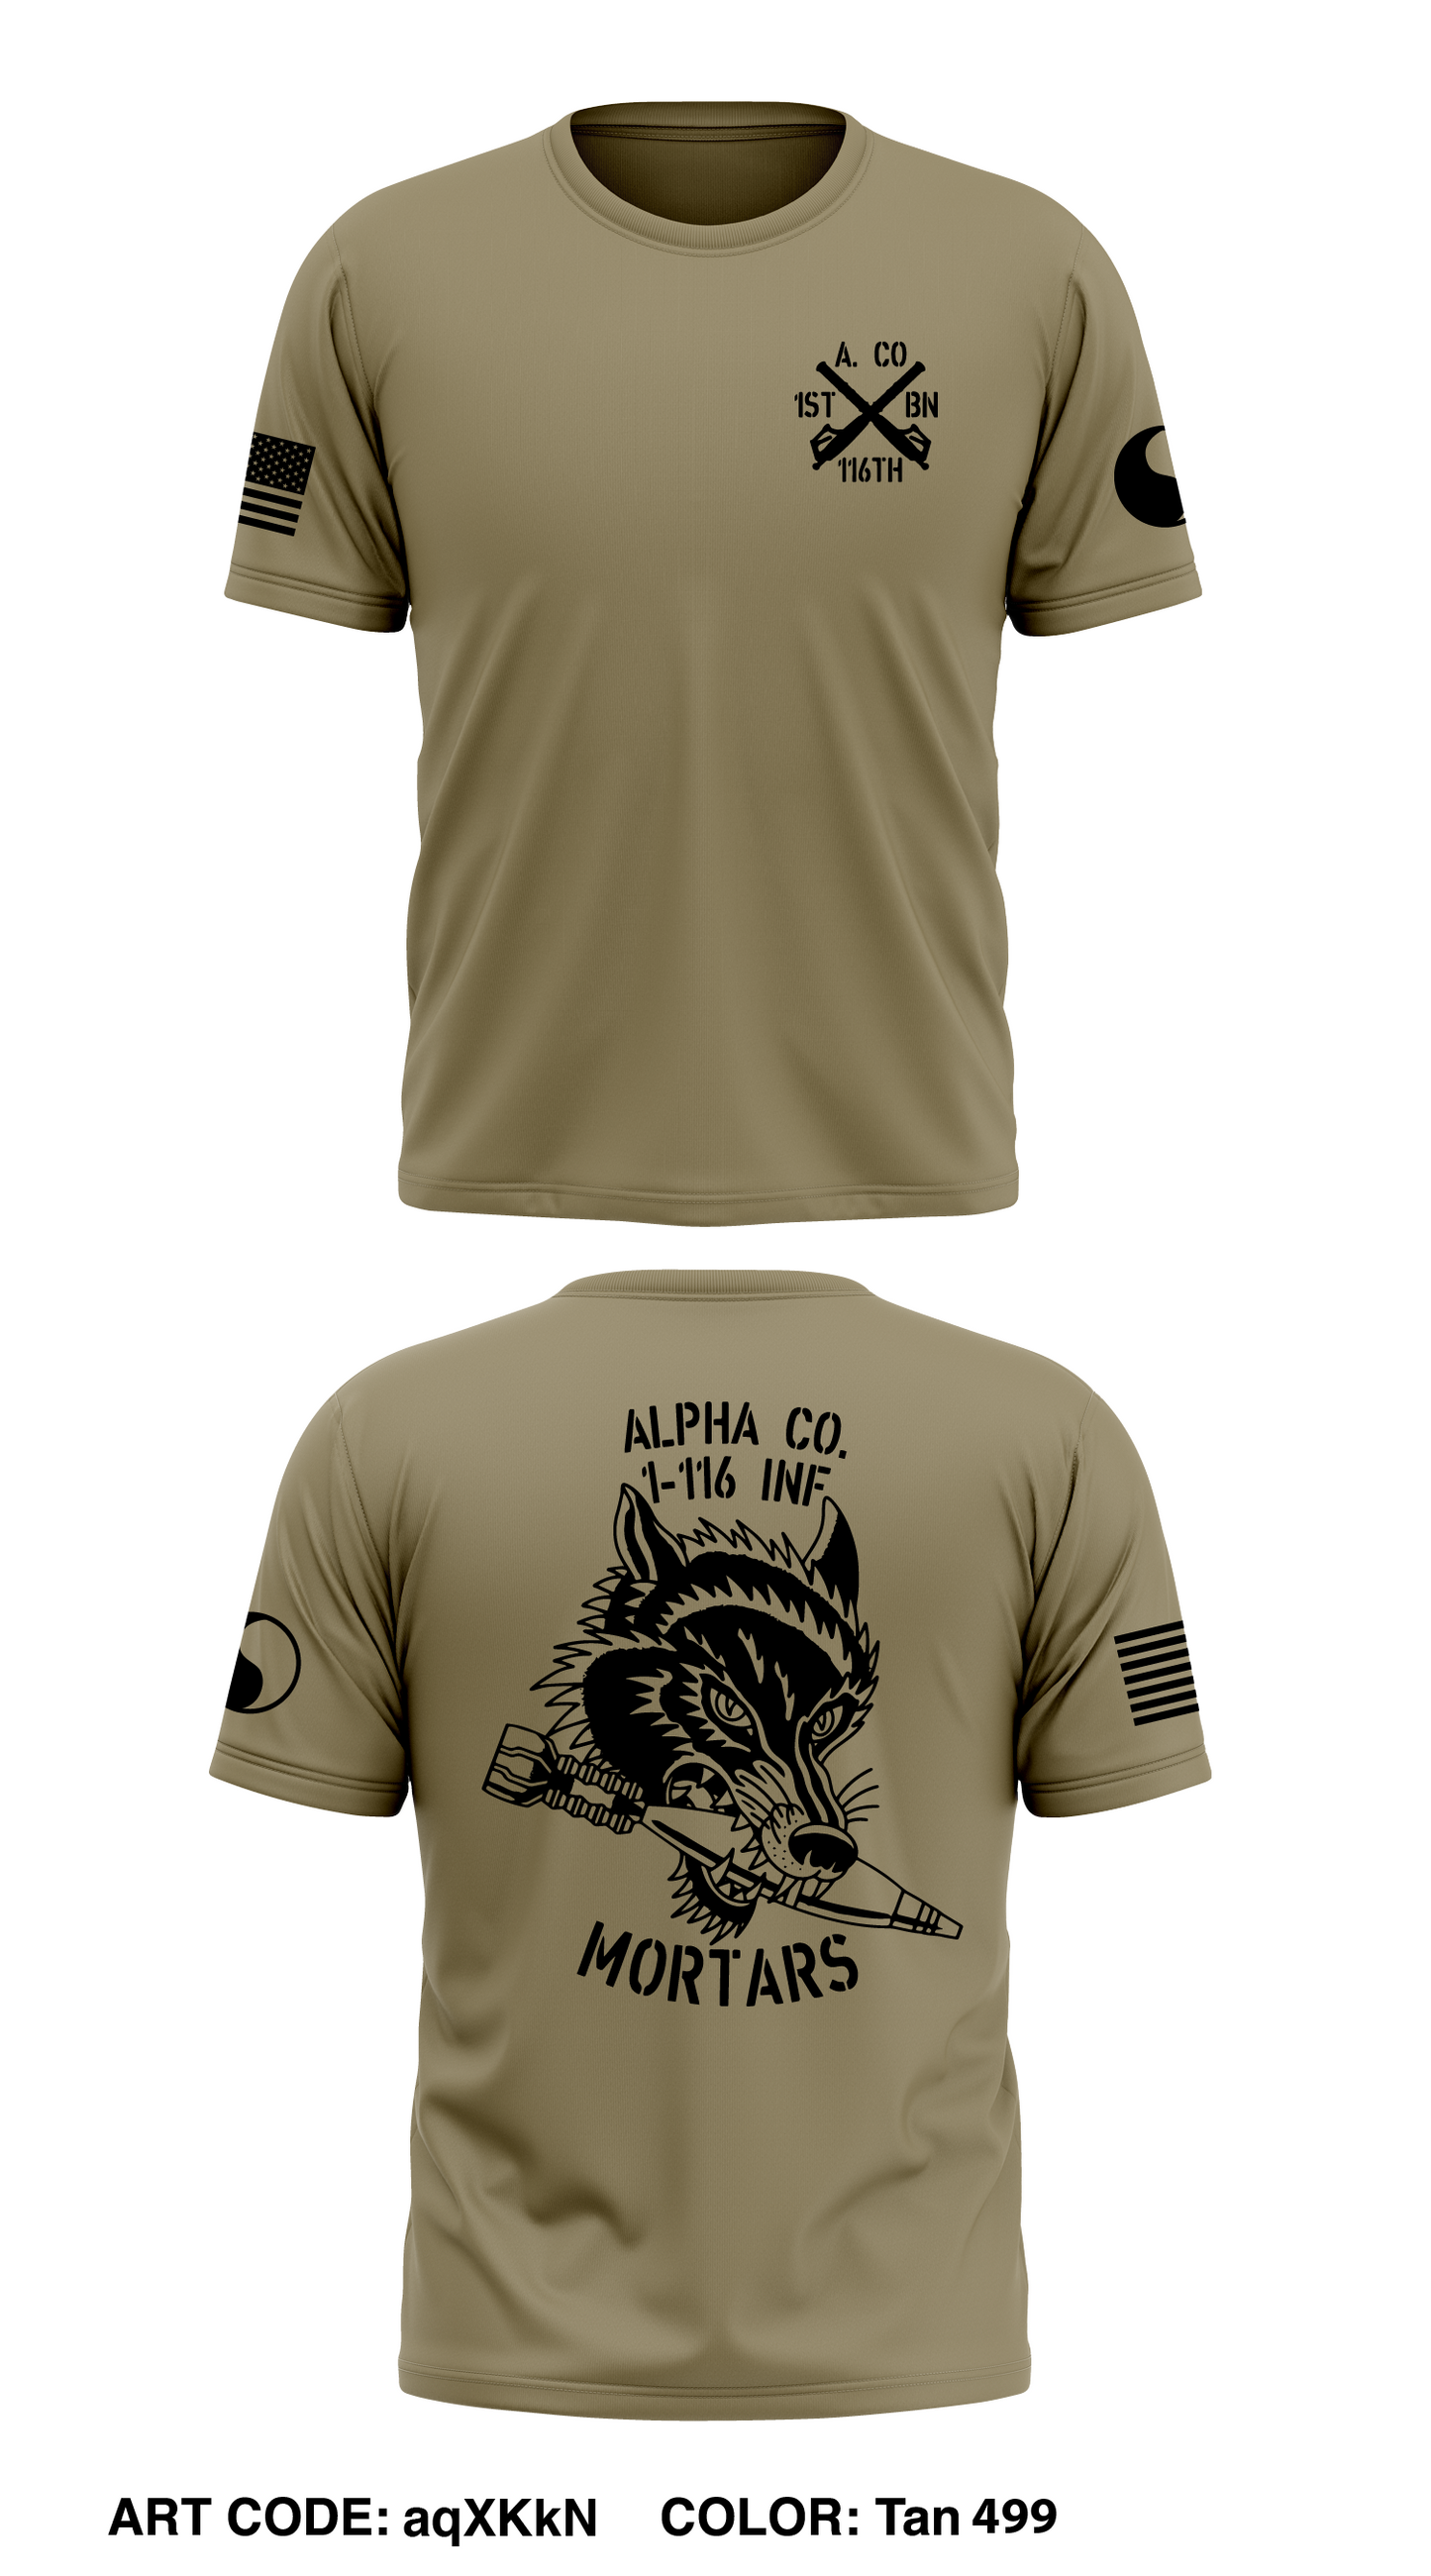 Alpha Company 1-116 INF, Mortars Section Store 1 Core Men's SS Perform –  Emblem Athletic